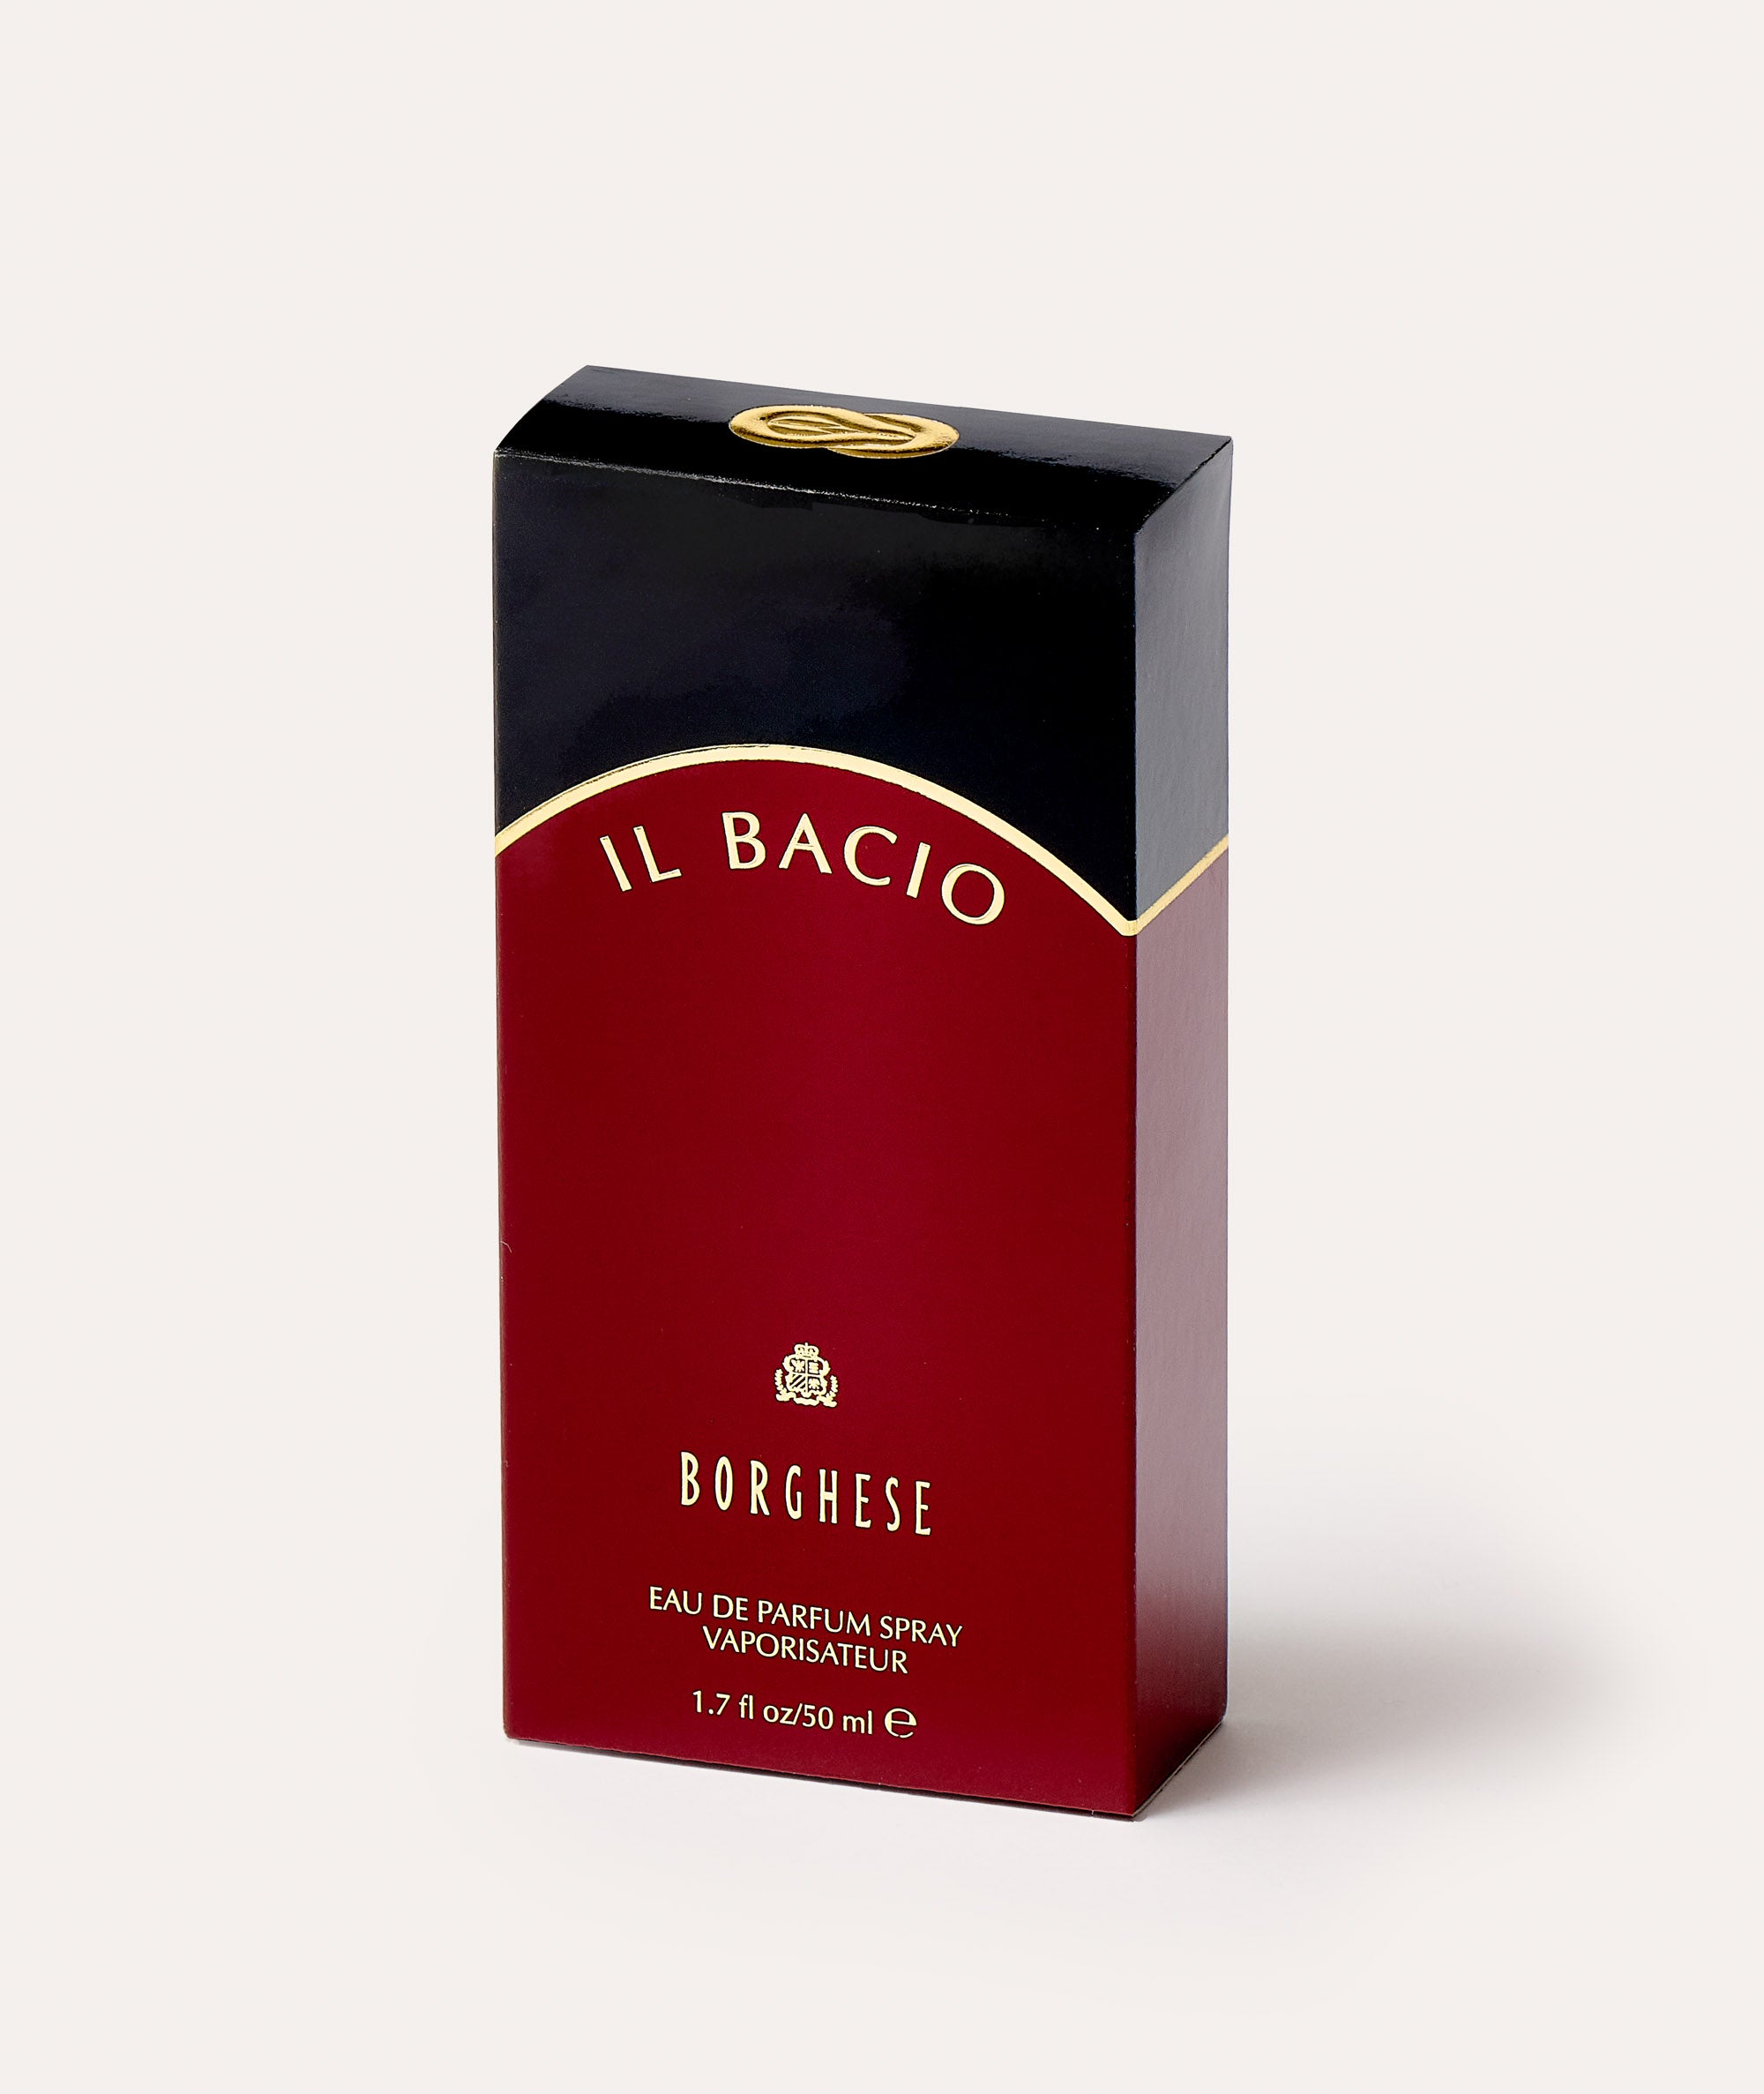 This is a picture of Borghese Il Bacio Eau De Parfum Spray in a box